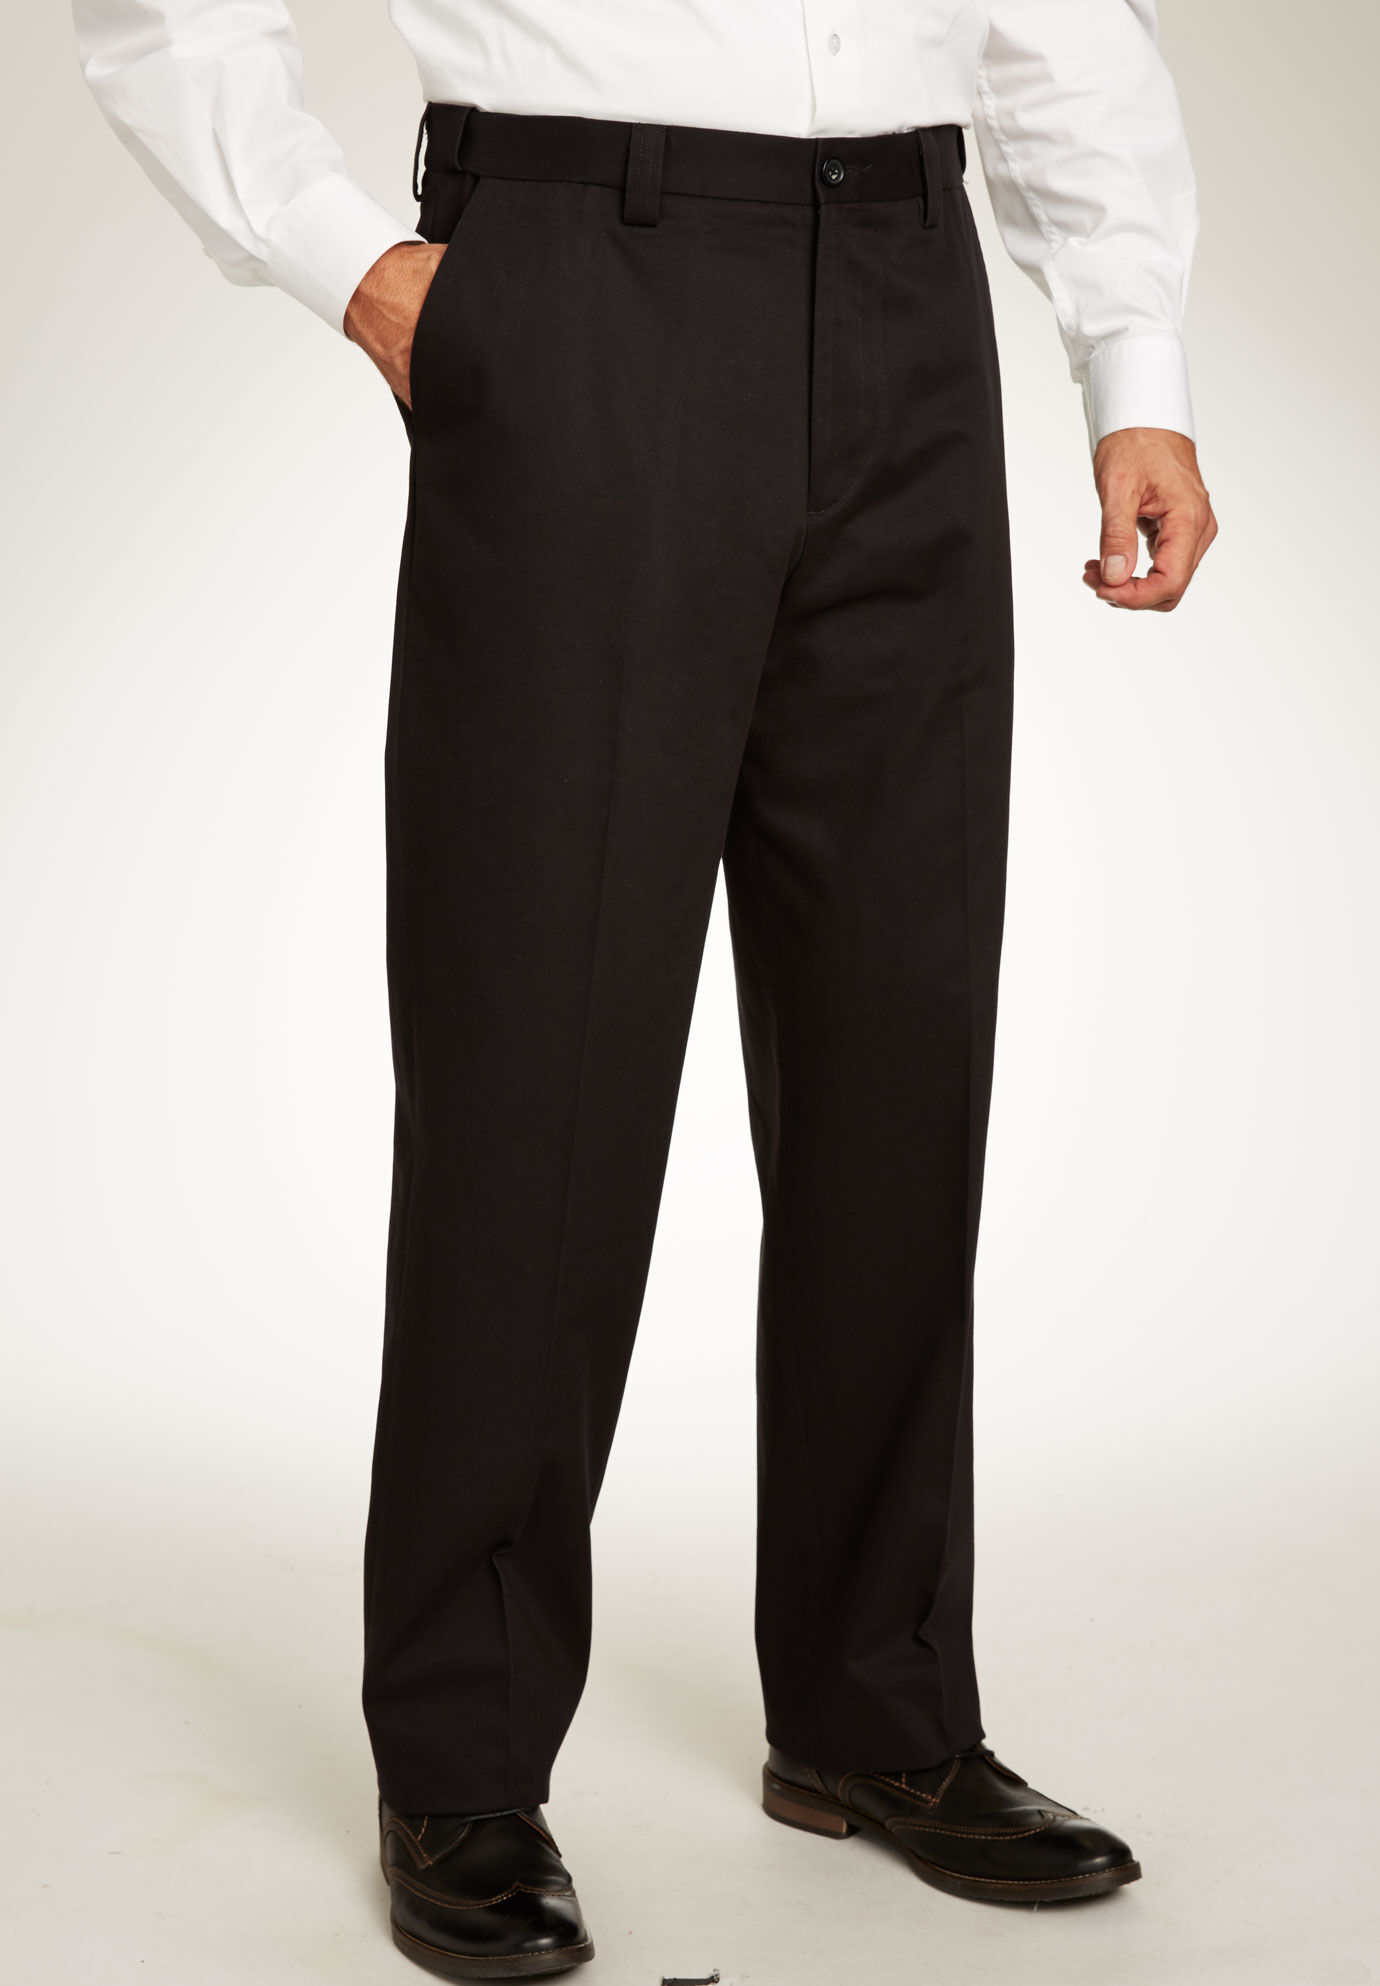 Men's Wrinkle-Free 100% Cotton Trouser Brownish – The Cut Price